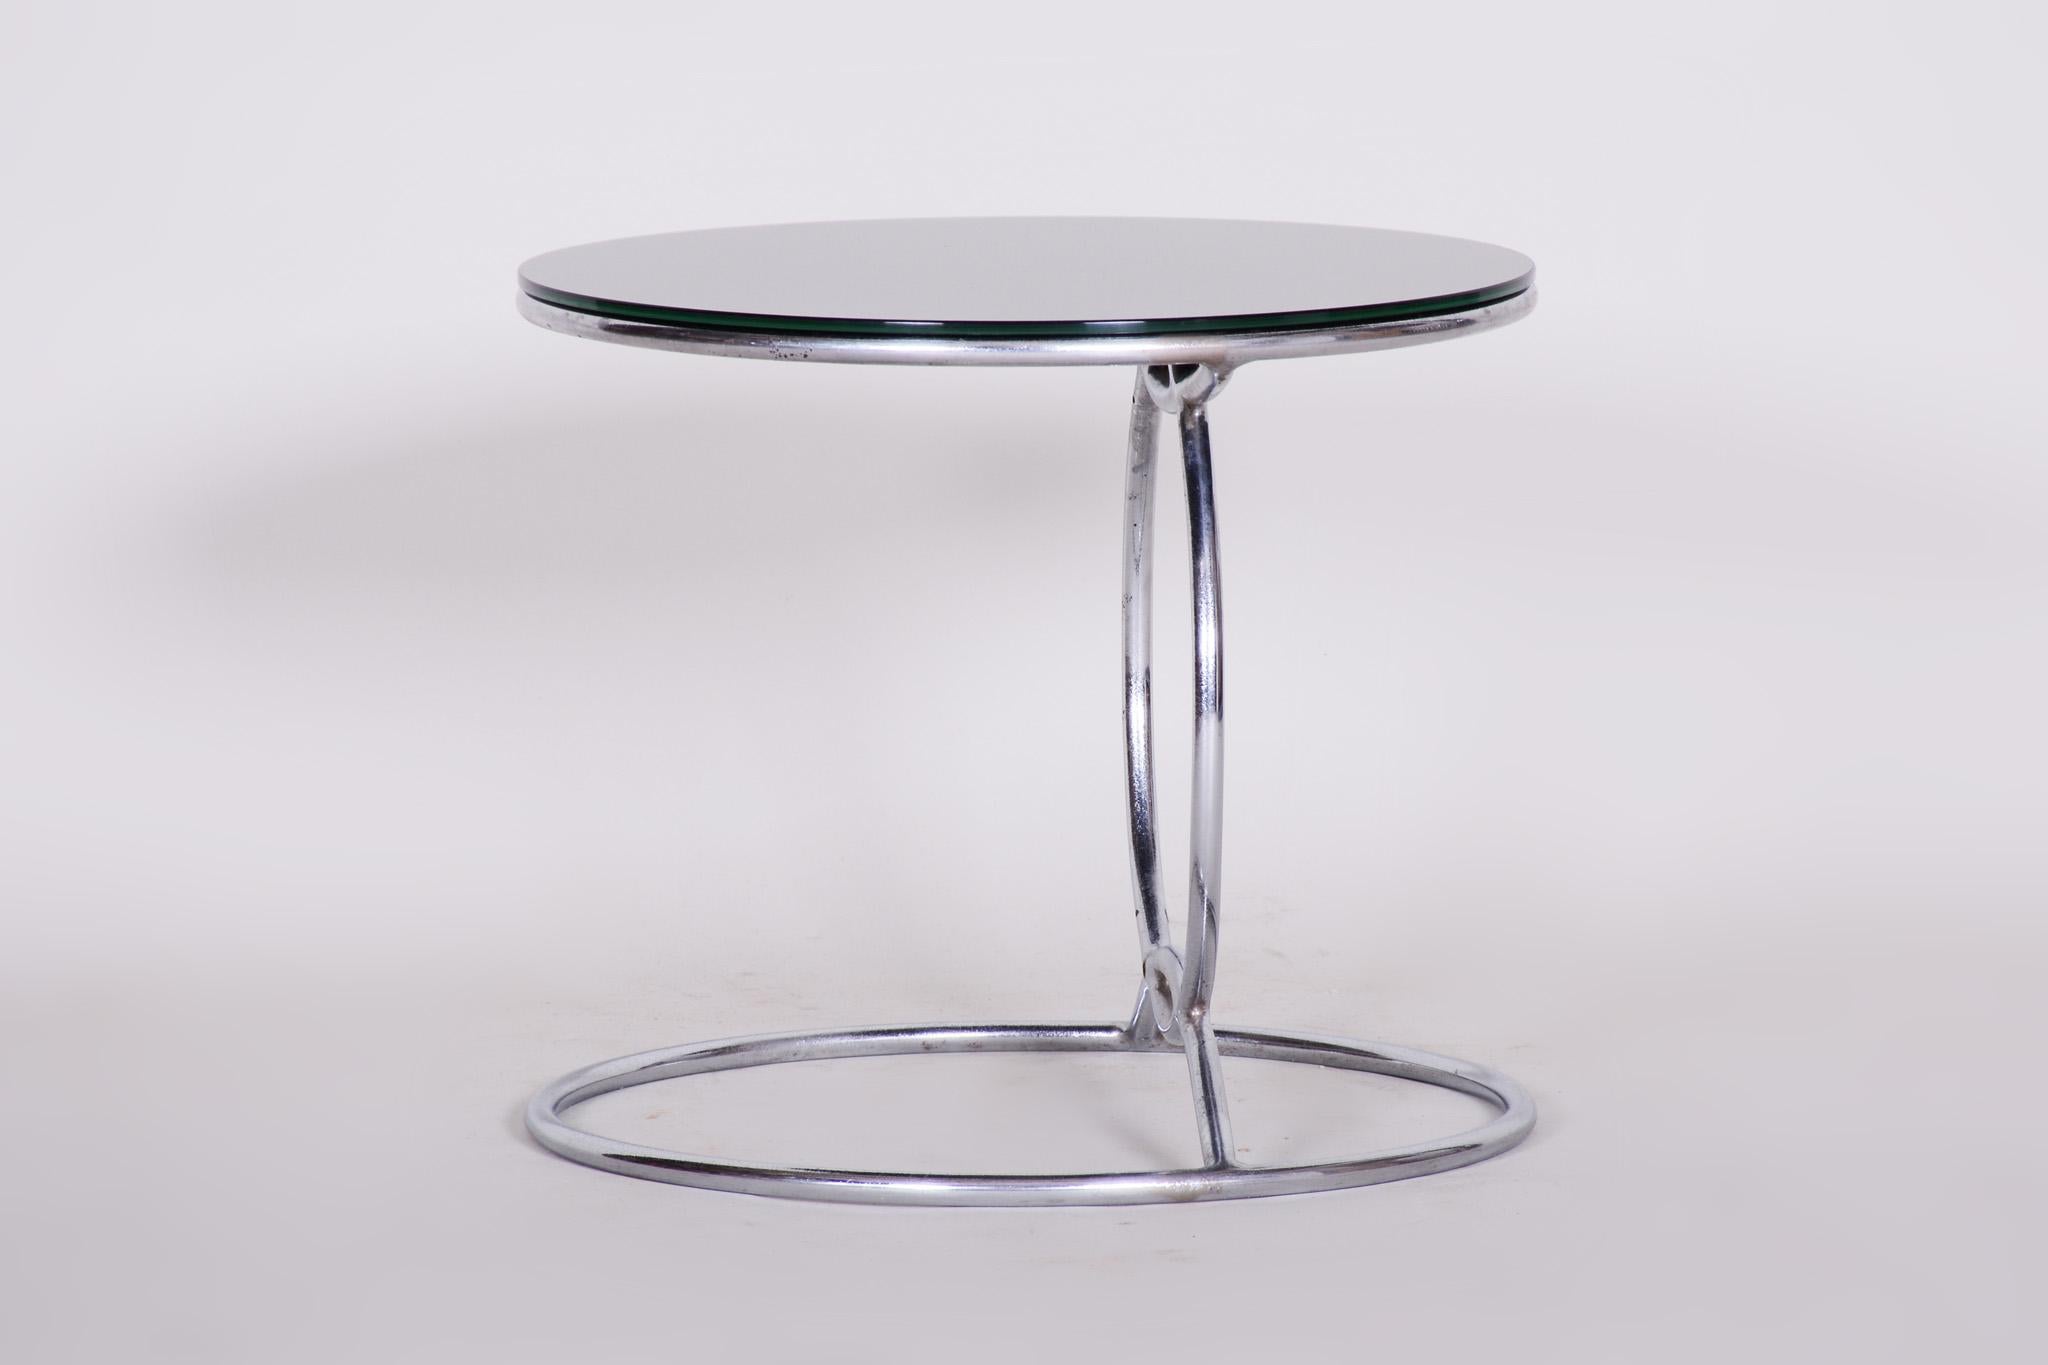 German Unusual Chrome Bauhaus Round Small Table, 1950s, Perfect Condition, Black glass